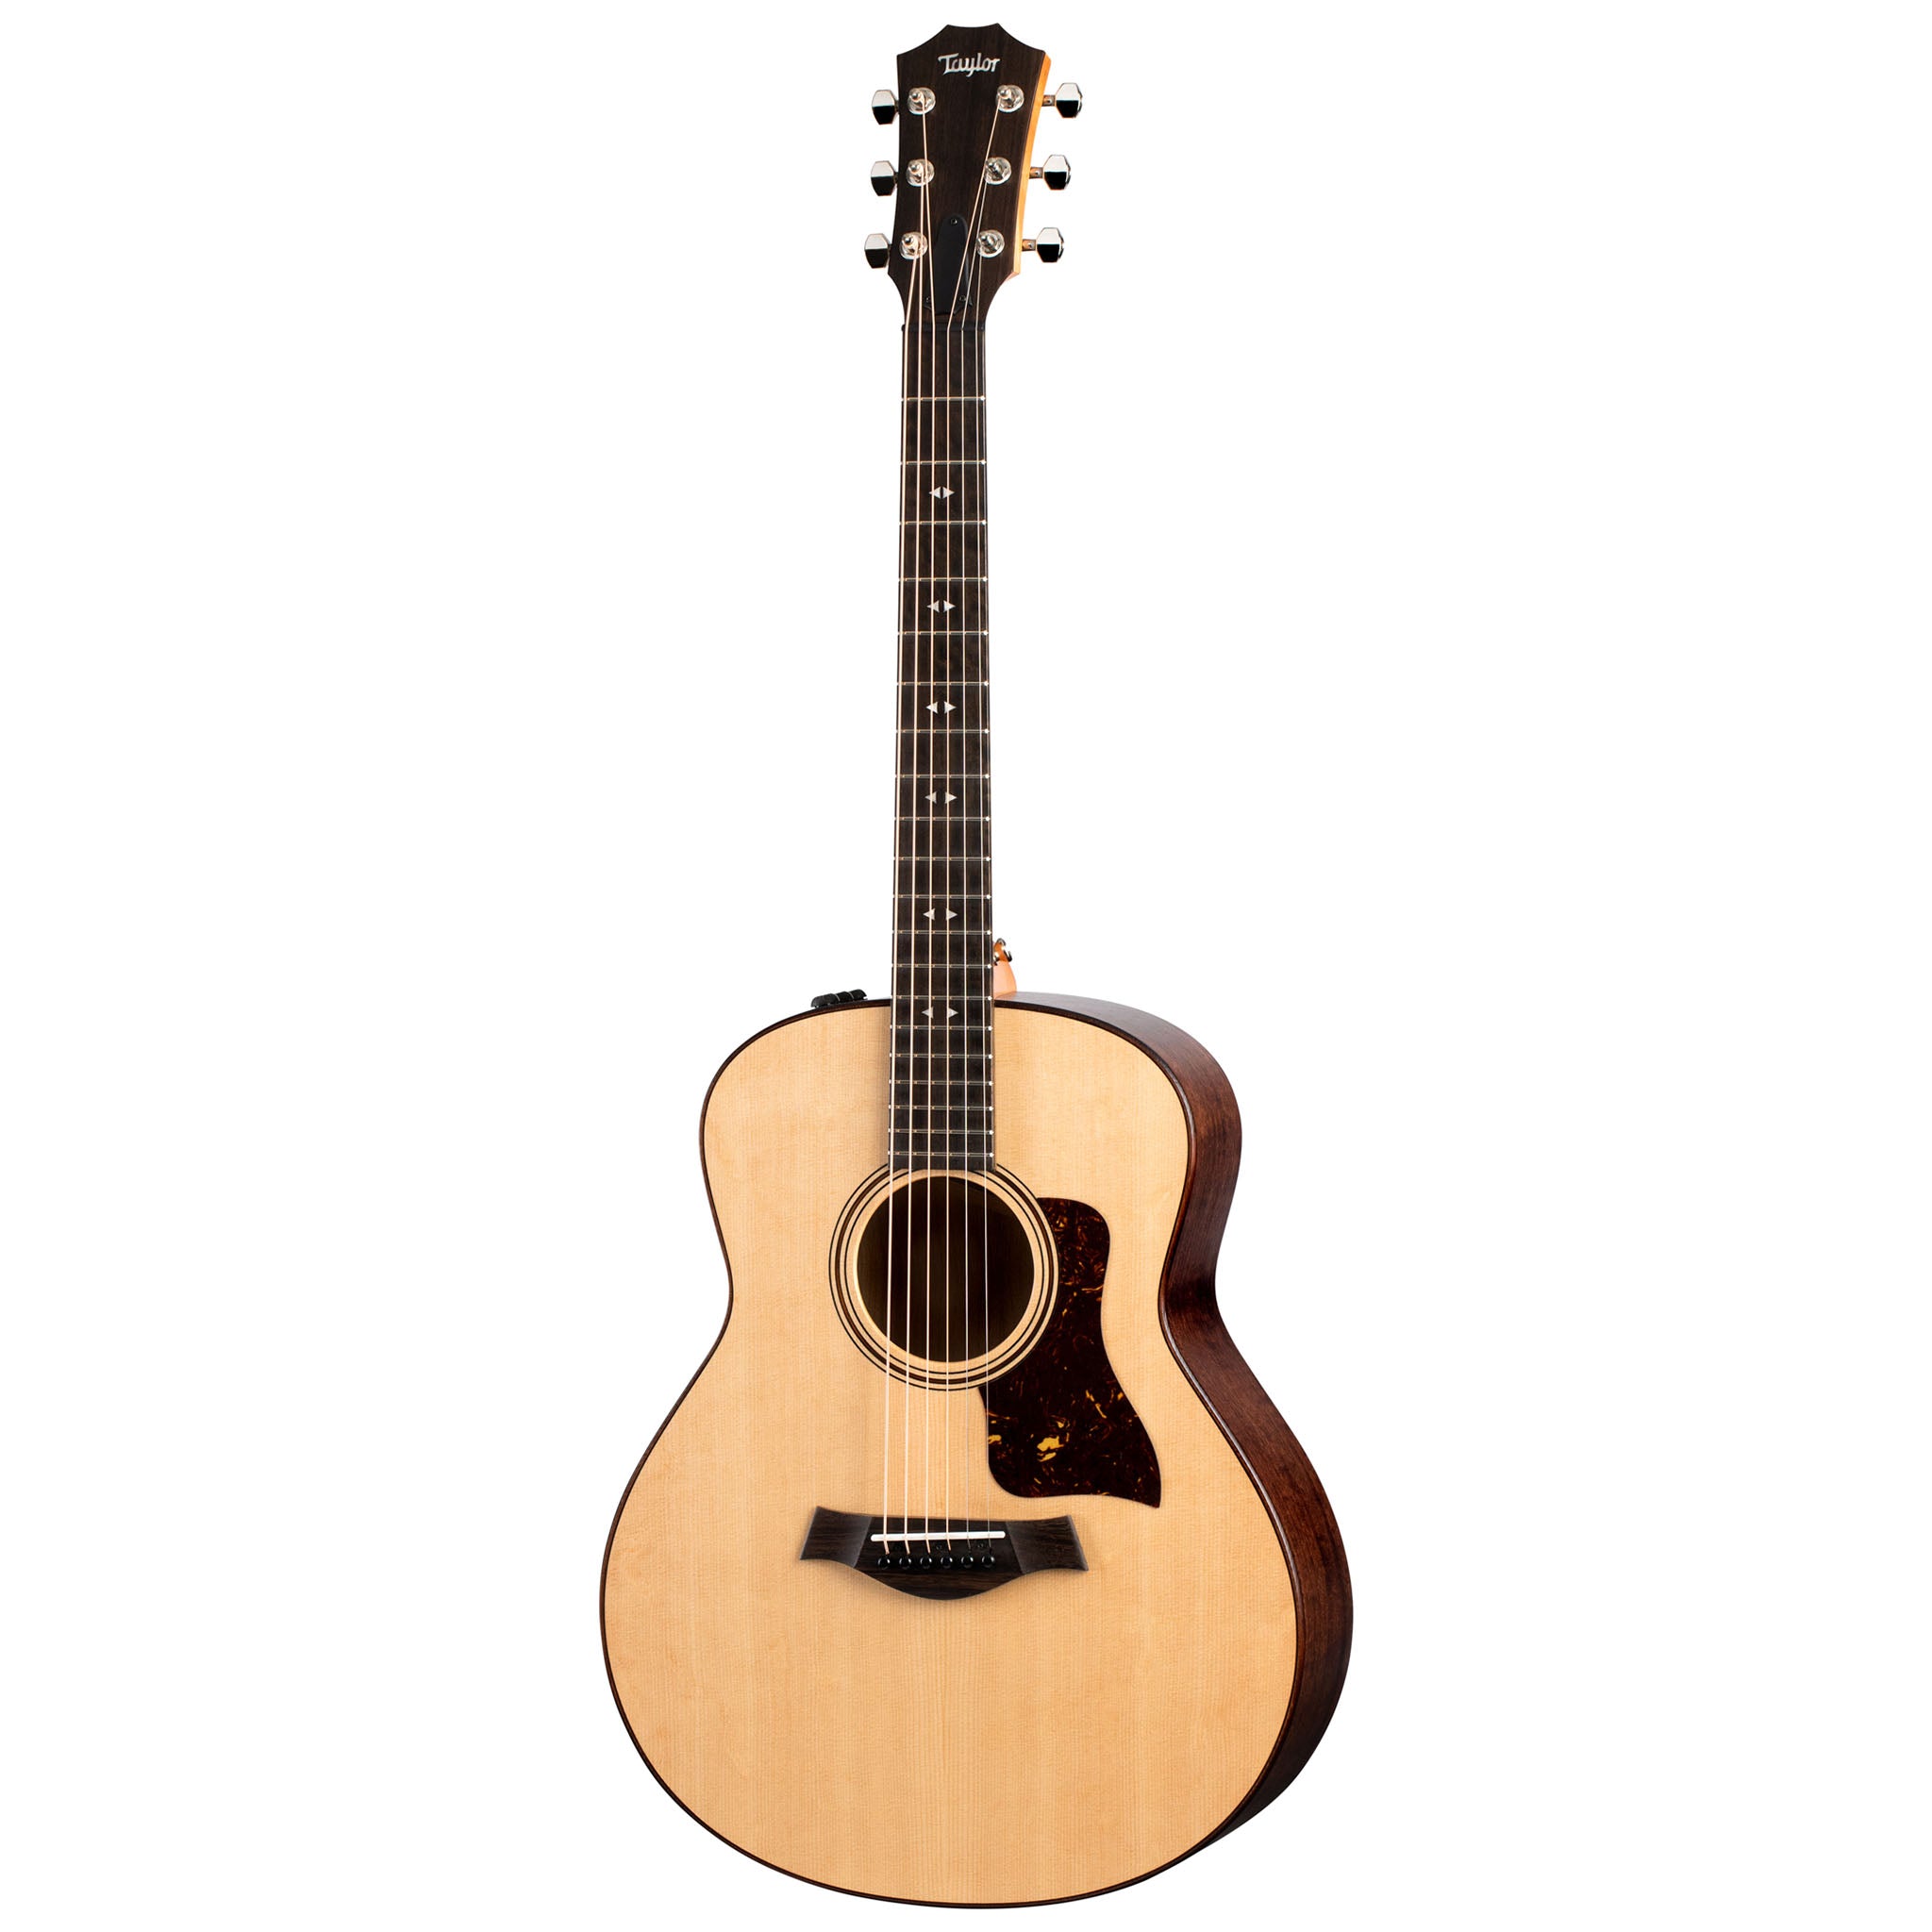 Taylor Grand Theater GTe Urban Ash Acoustic-Electric Guitar